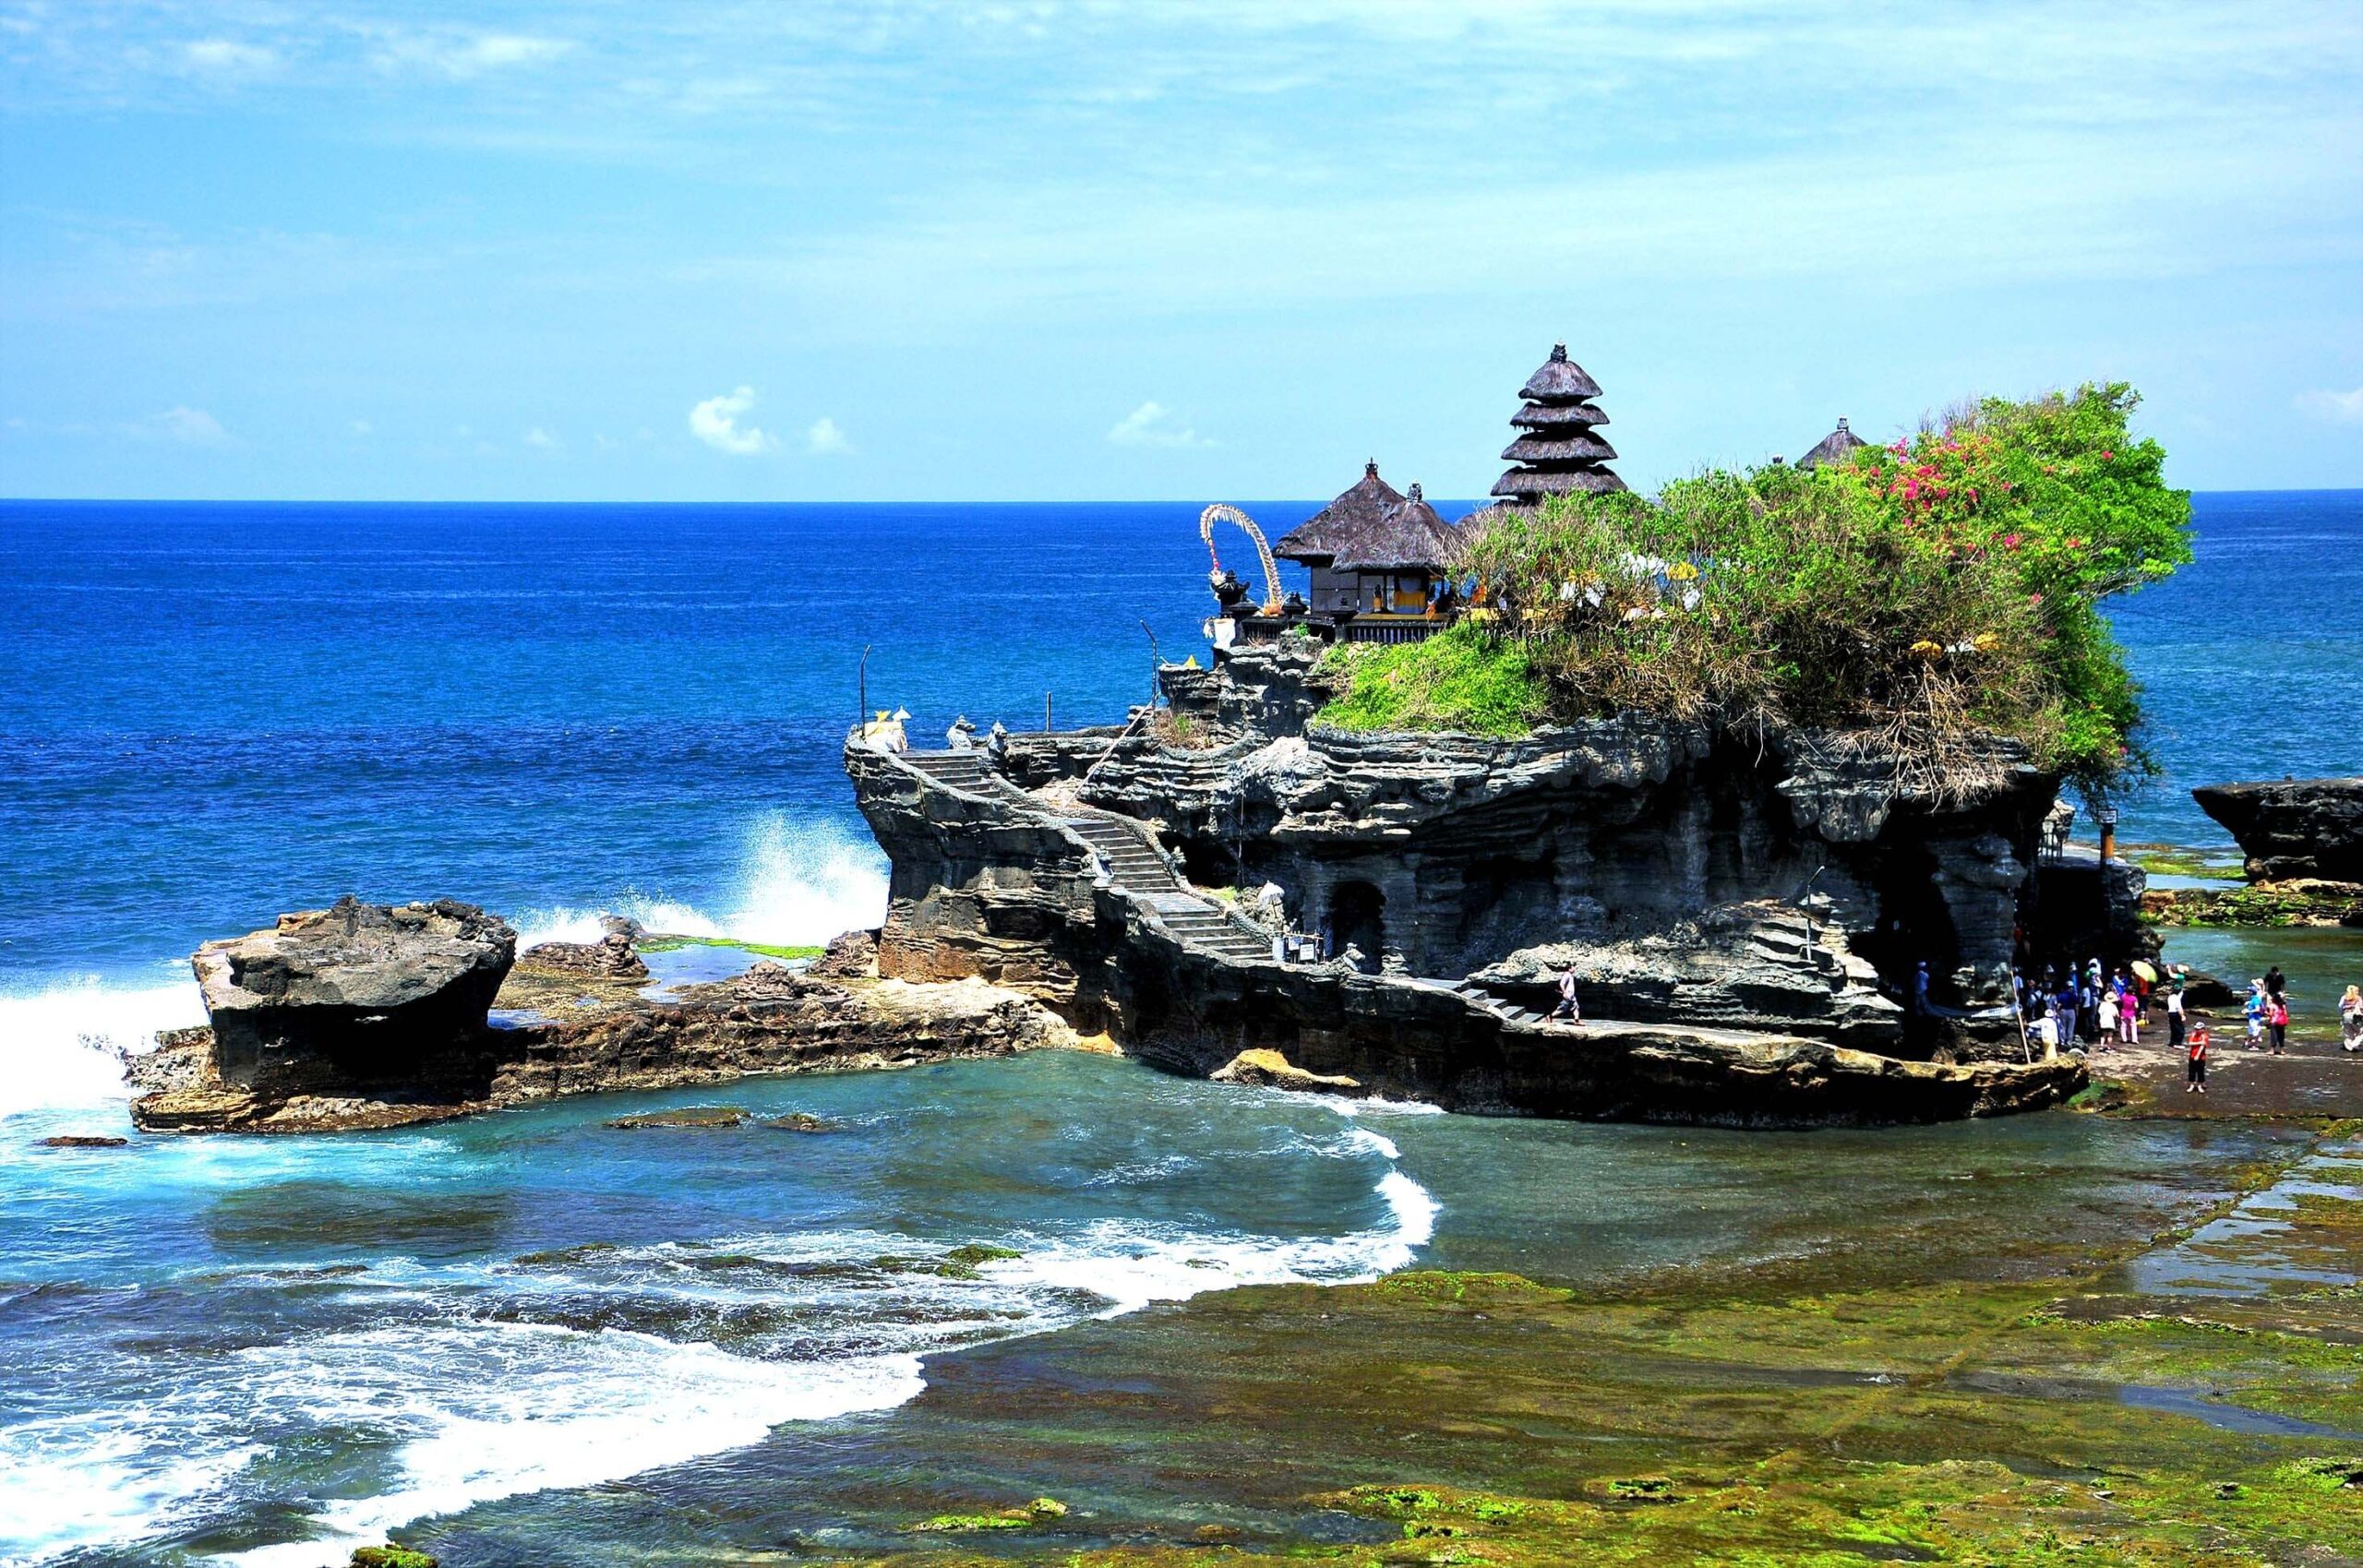 10 Best Places to visit in Bali for a Perfect Vacation scaled